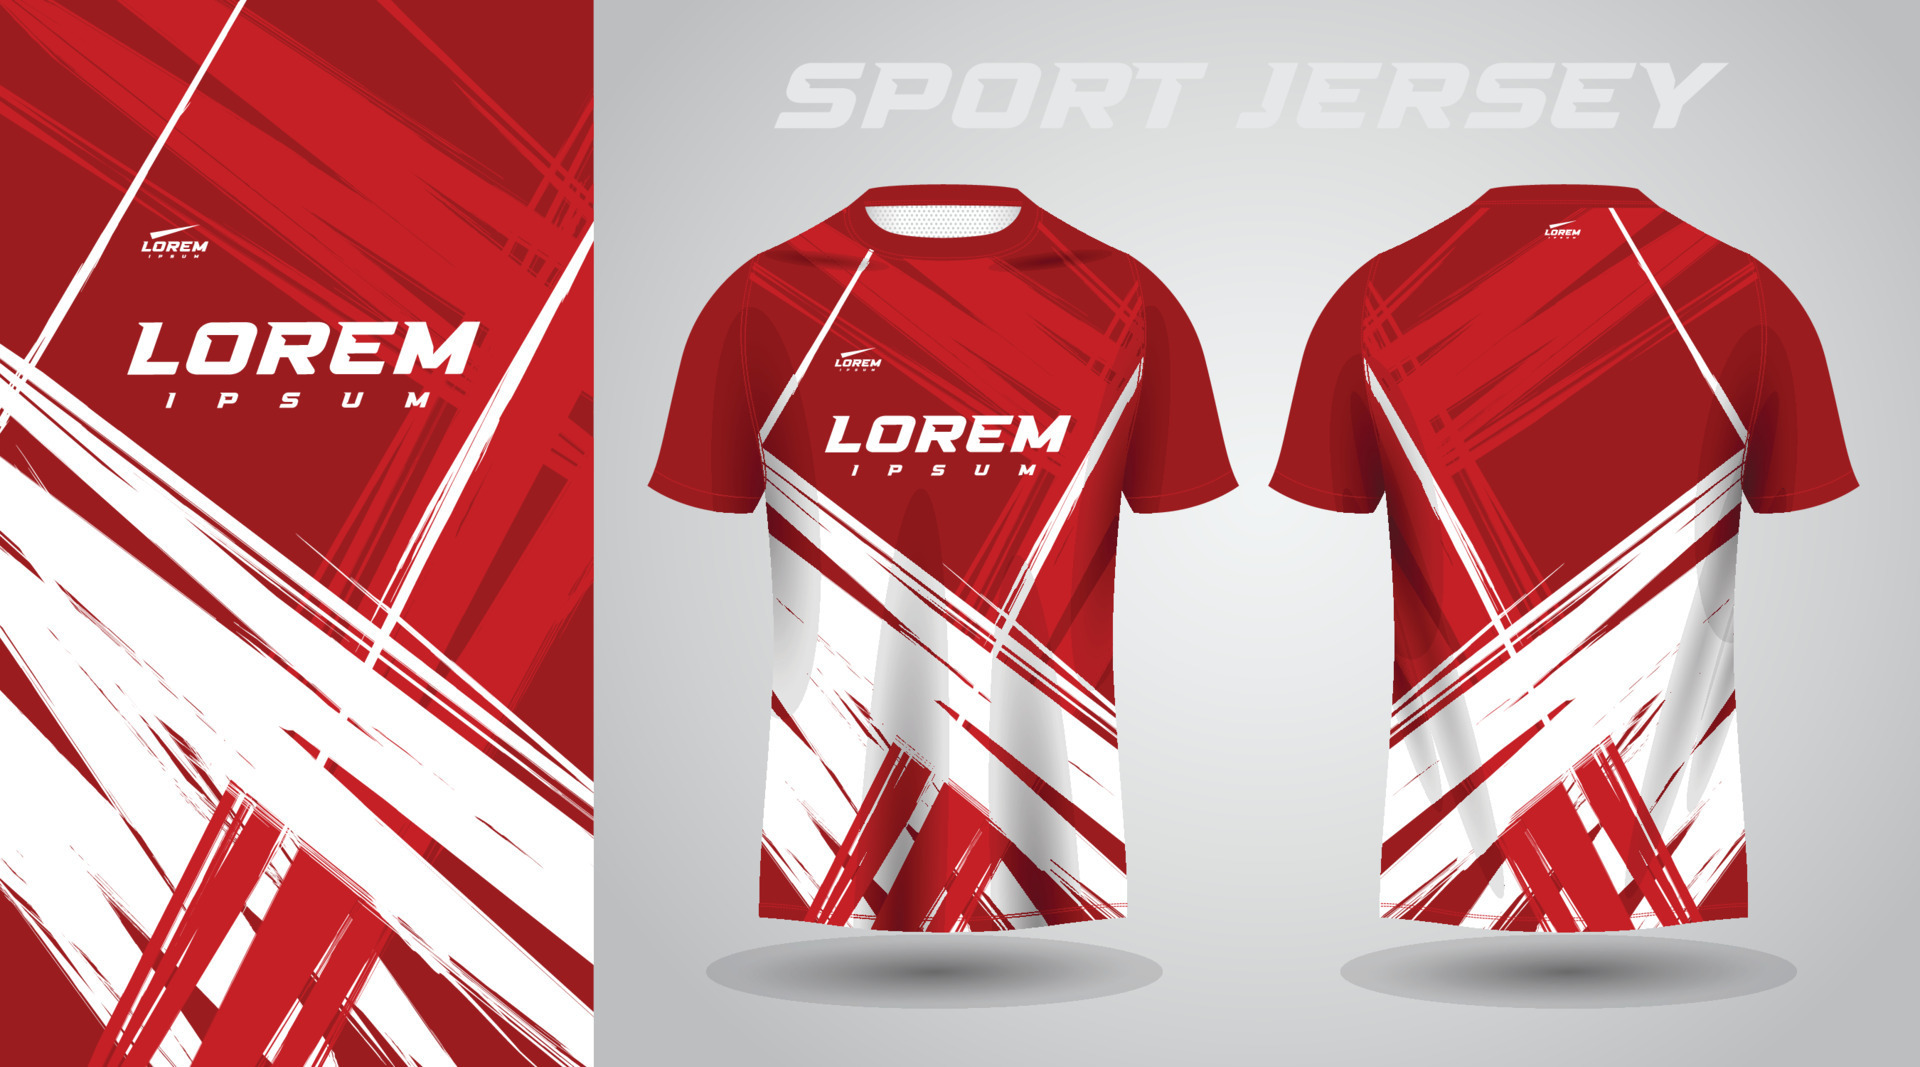 red and white jersey design